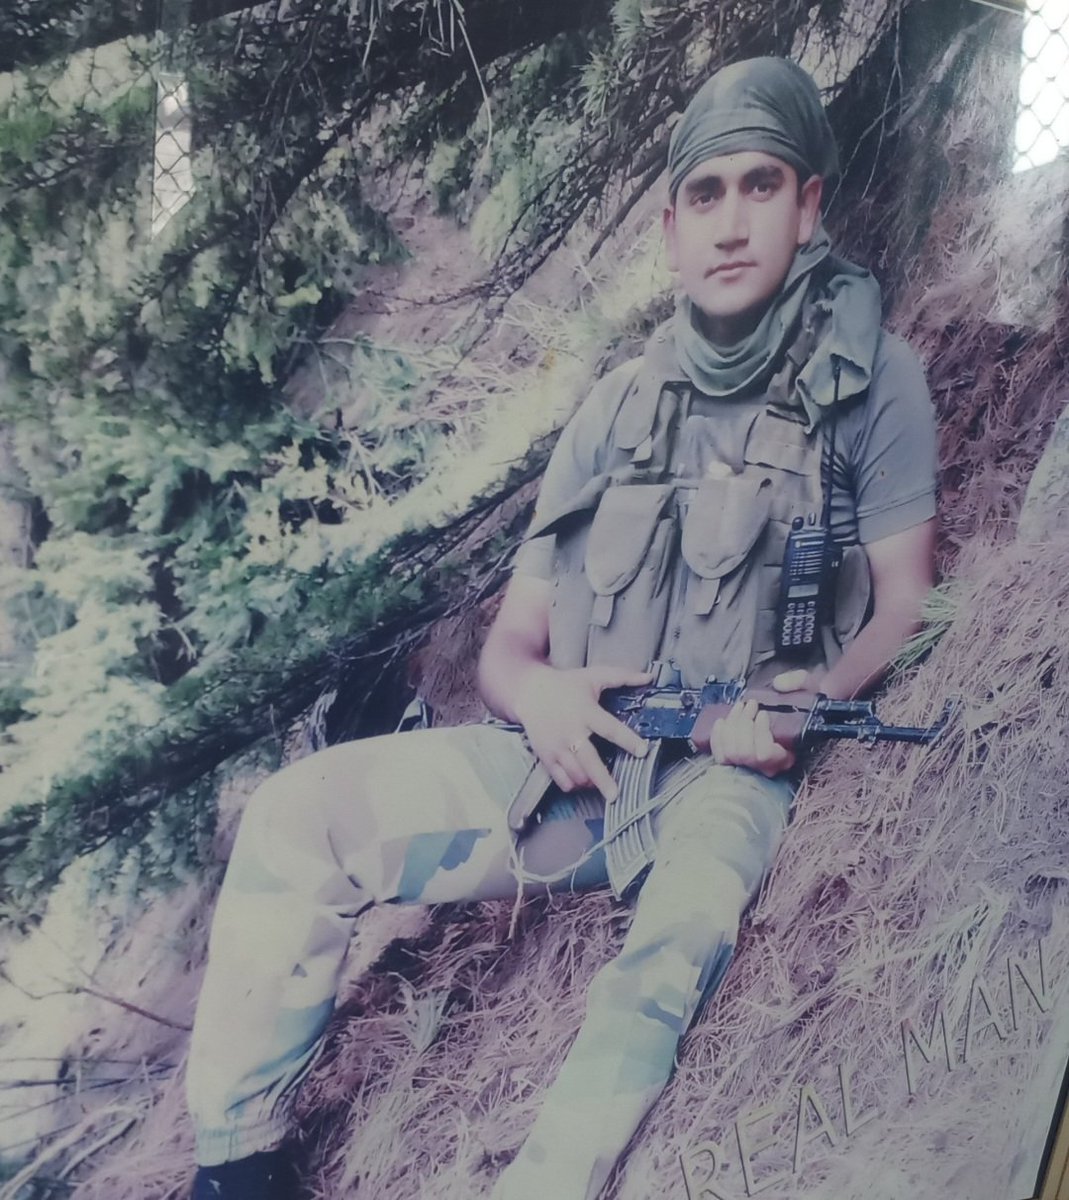 On night of 27 Sept 2011, Lt Sushil Khajuria KC leading his troops on a search & destroy mission in jungles of Kupwara courageously sacrificed all Honour to pay respects to Amar Veer & family on last #BalidanDiwas 🙏🇮🇳 Moved to tears at pic carrying his Dadi #FreedomIsNotFree